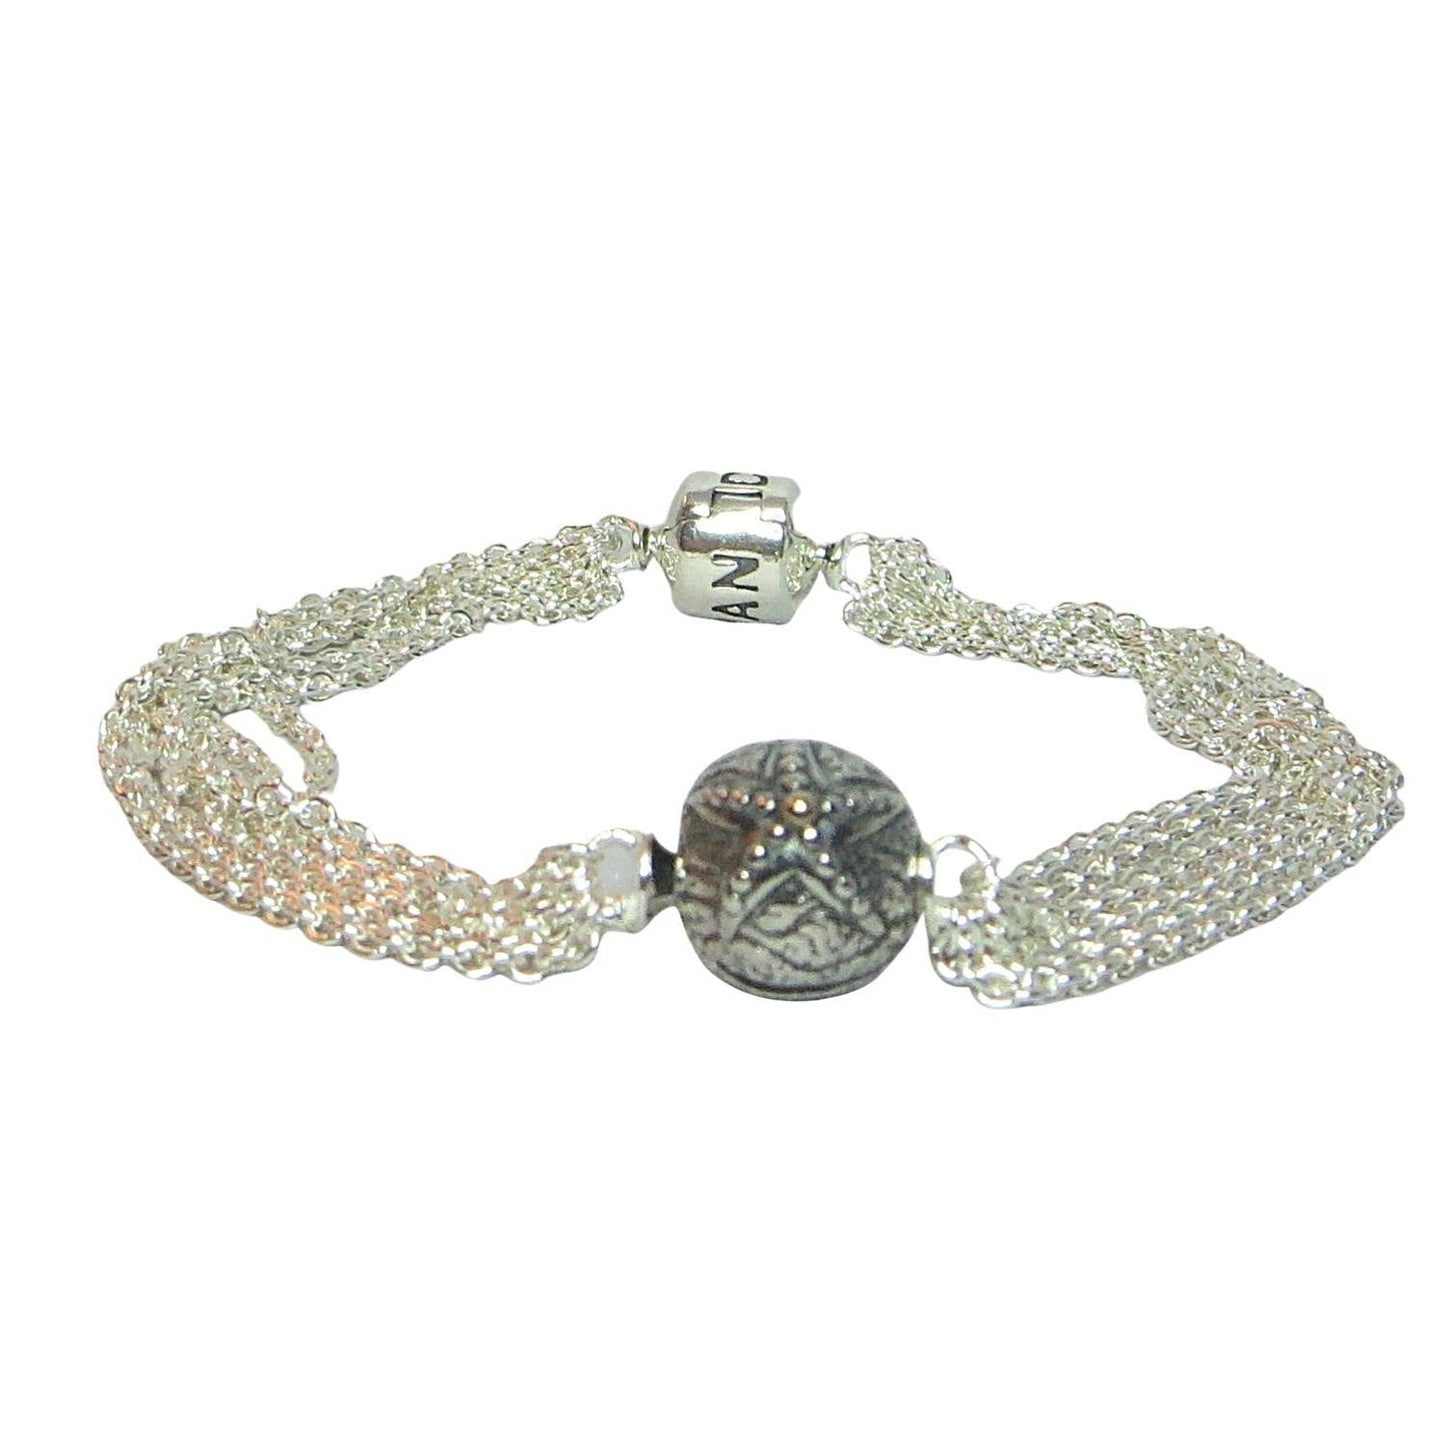 PANDORA 591701 Multistrand Chain One-clip Sterling Silver Bracelet Multiple sizes - Charming Jilly